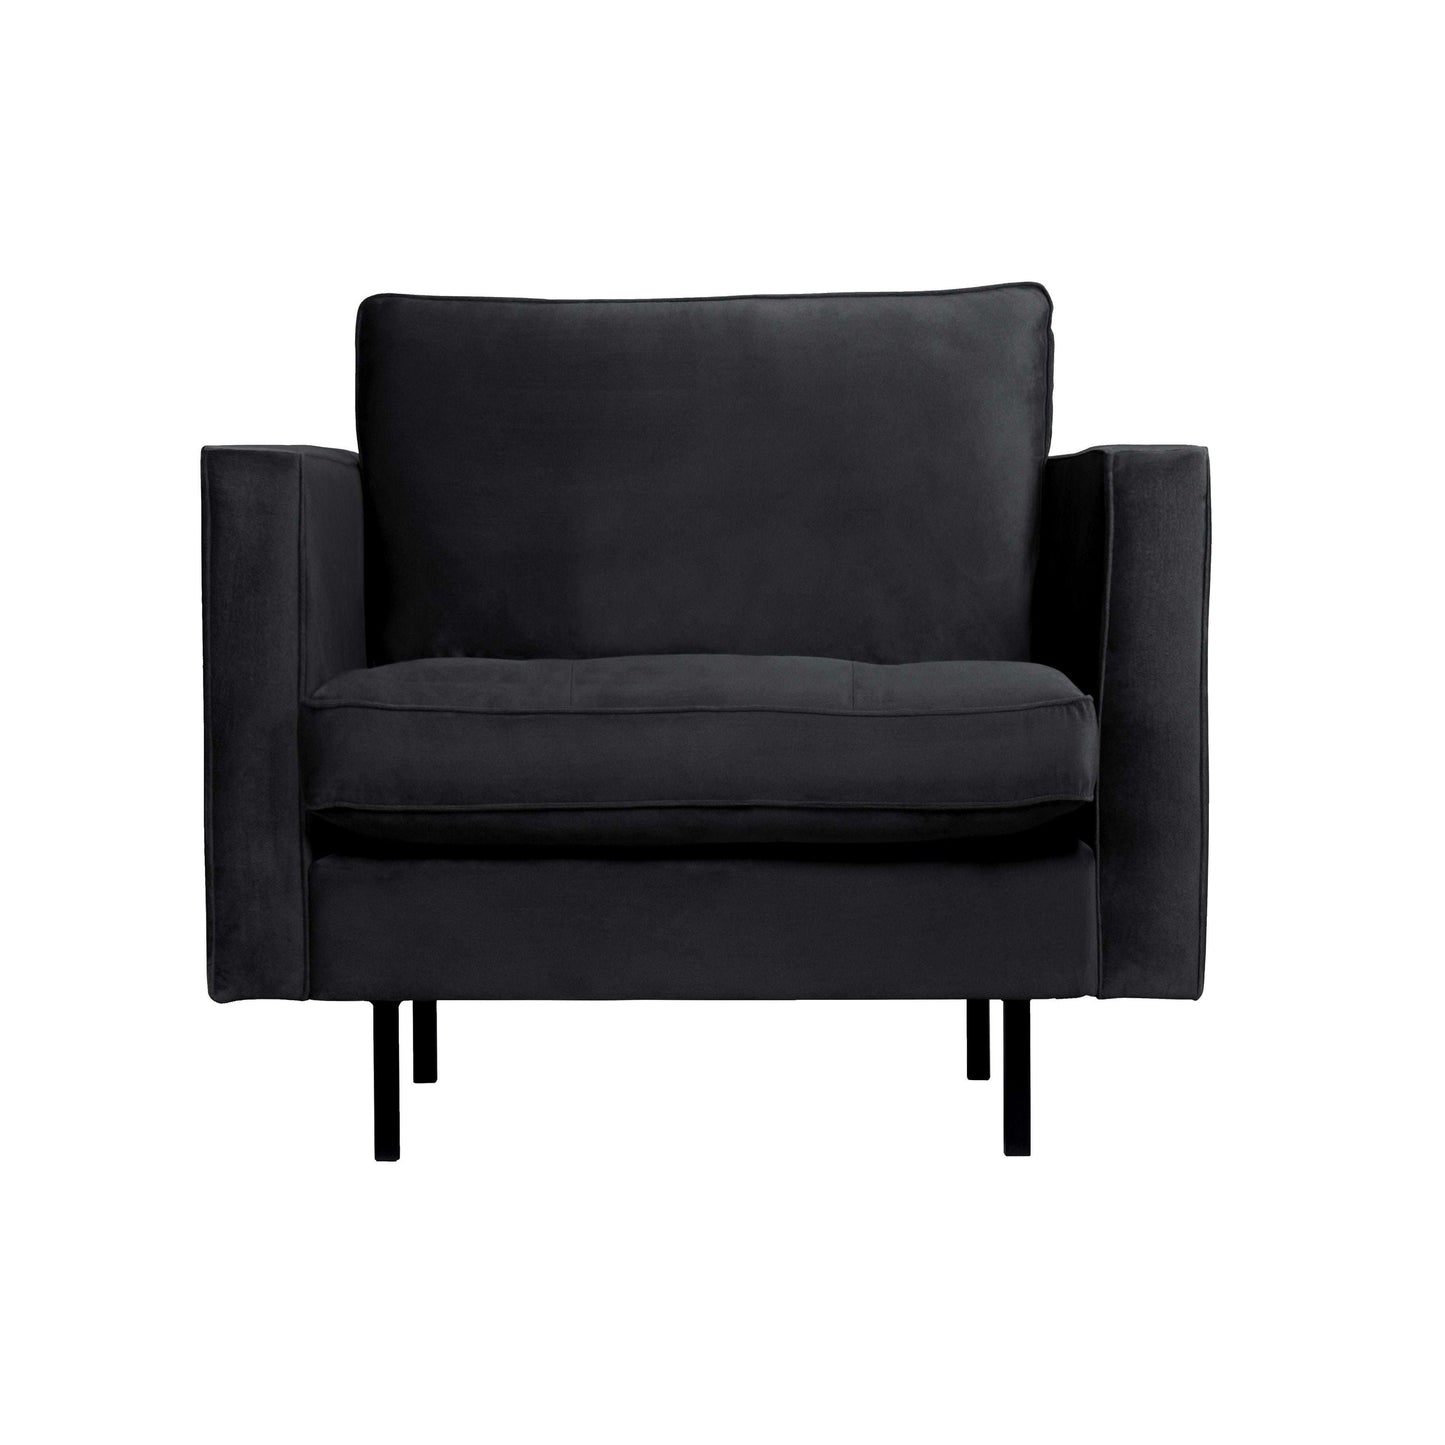 BePureHome Rodeo classic fauteuil antraciet